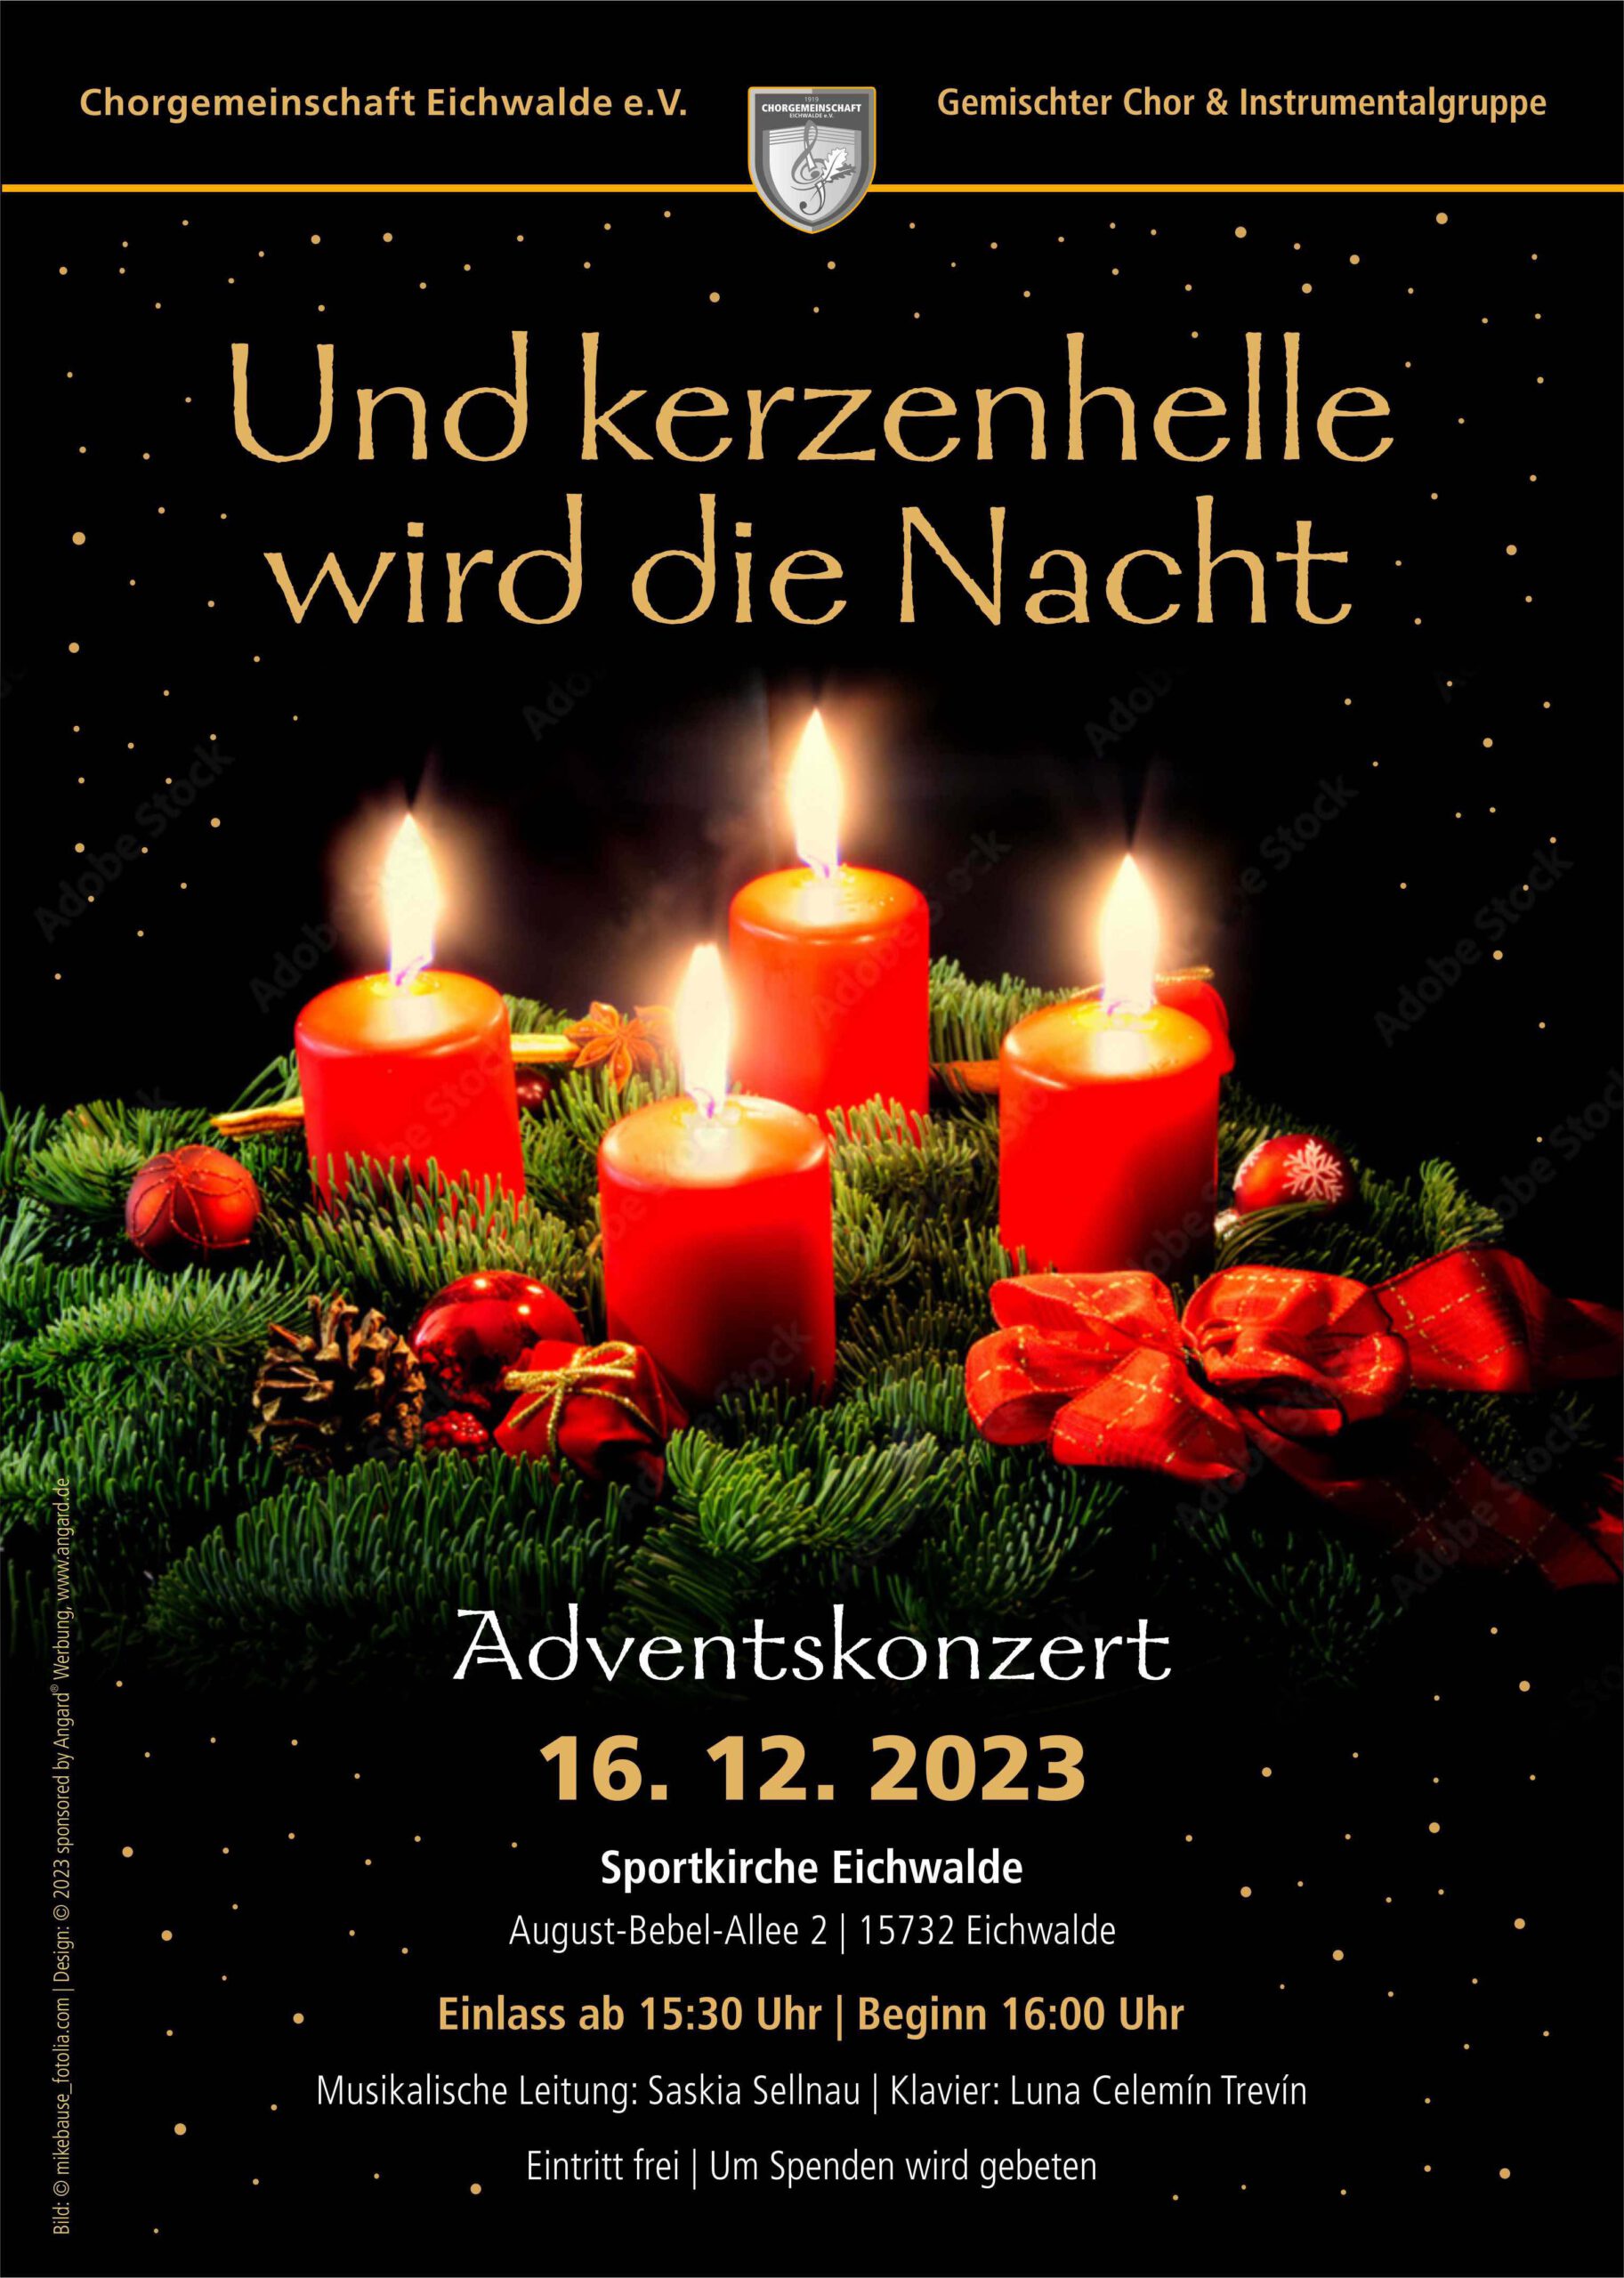 You are currently viewing Adventskonzert